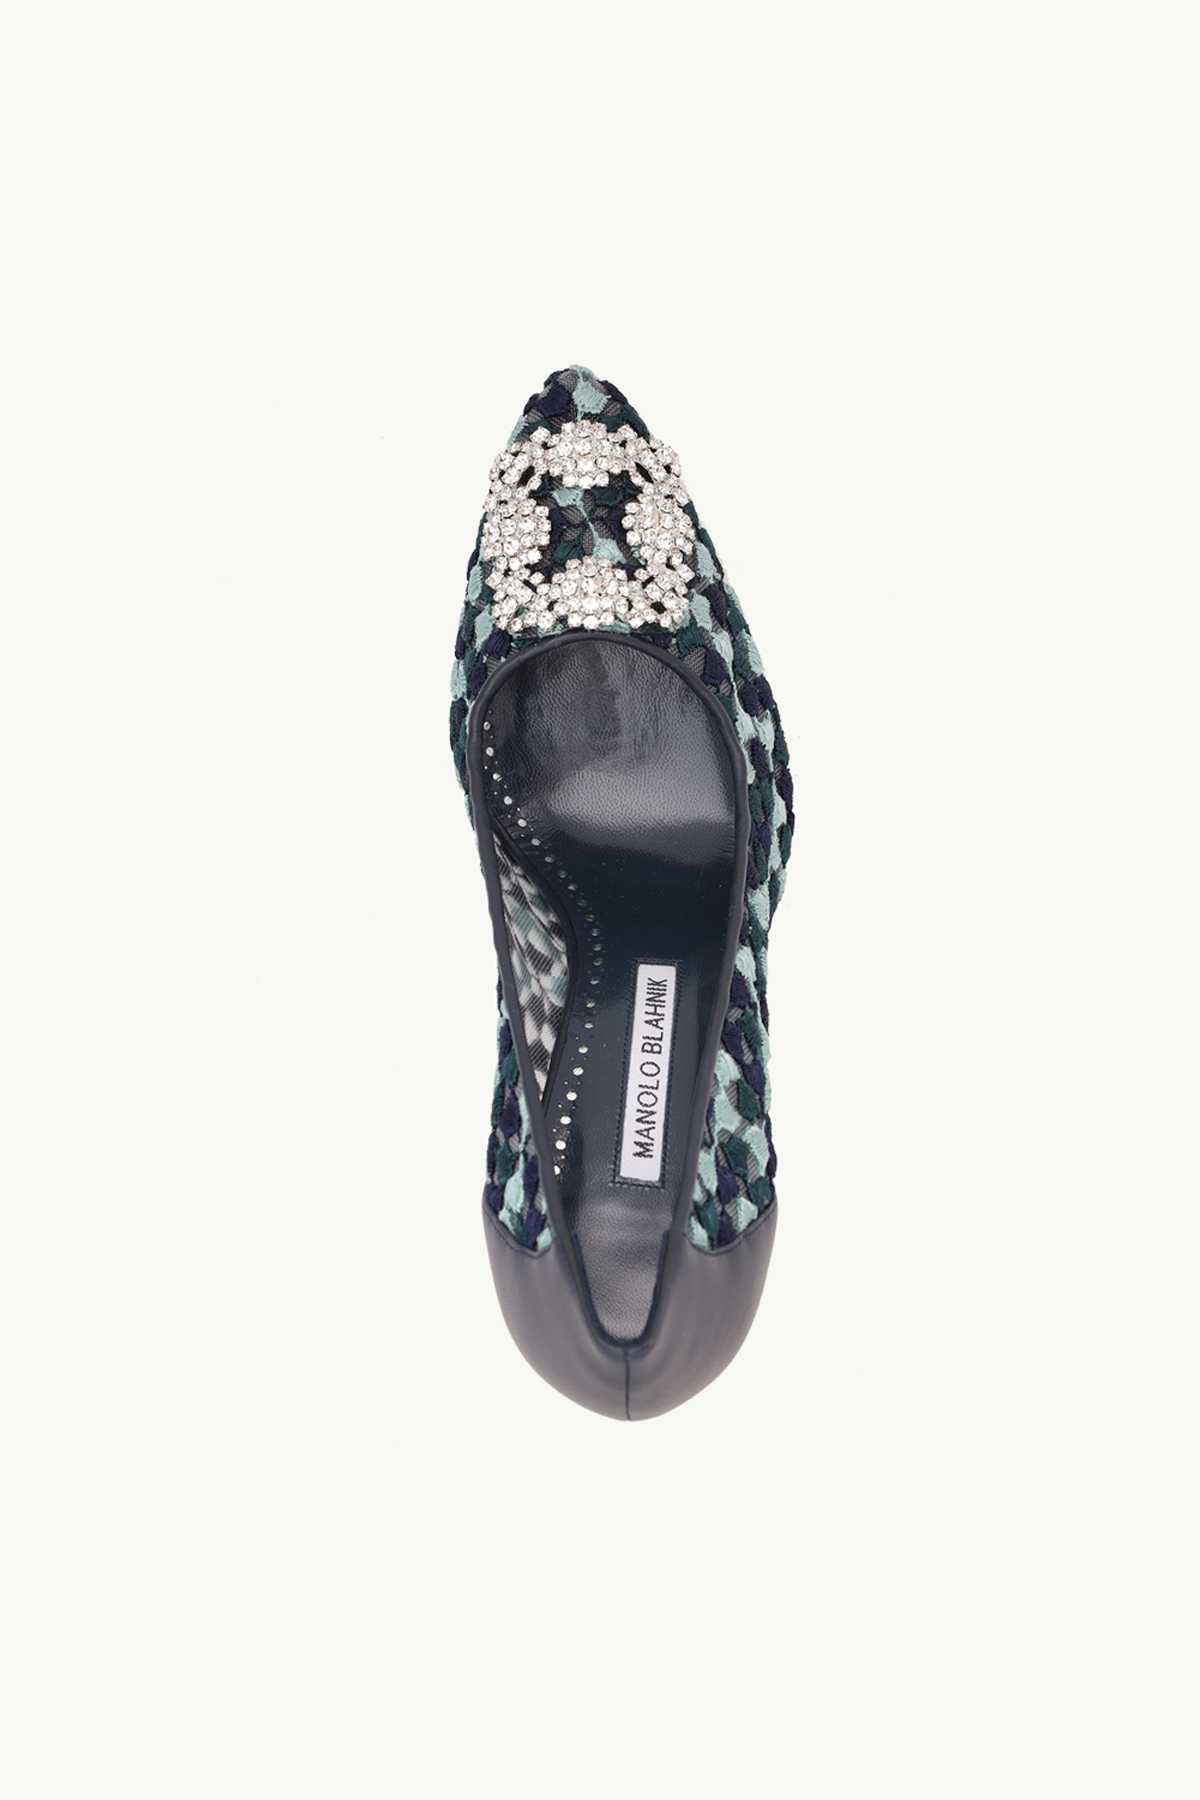 MANOLO BLAHNIK Hangisi Floral Embroidery 10.5cm Pumps in Navy/Turquoise Lace x Nappa with White Crystal 3